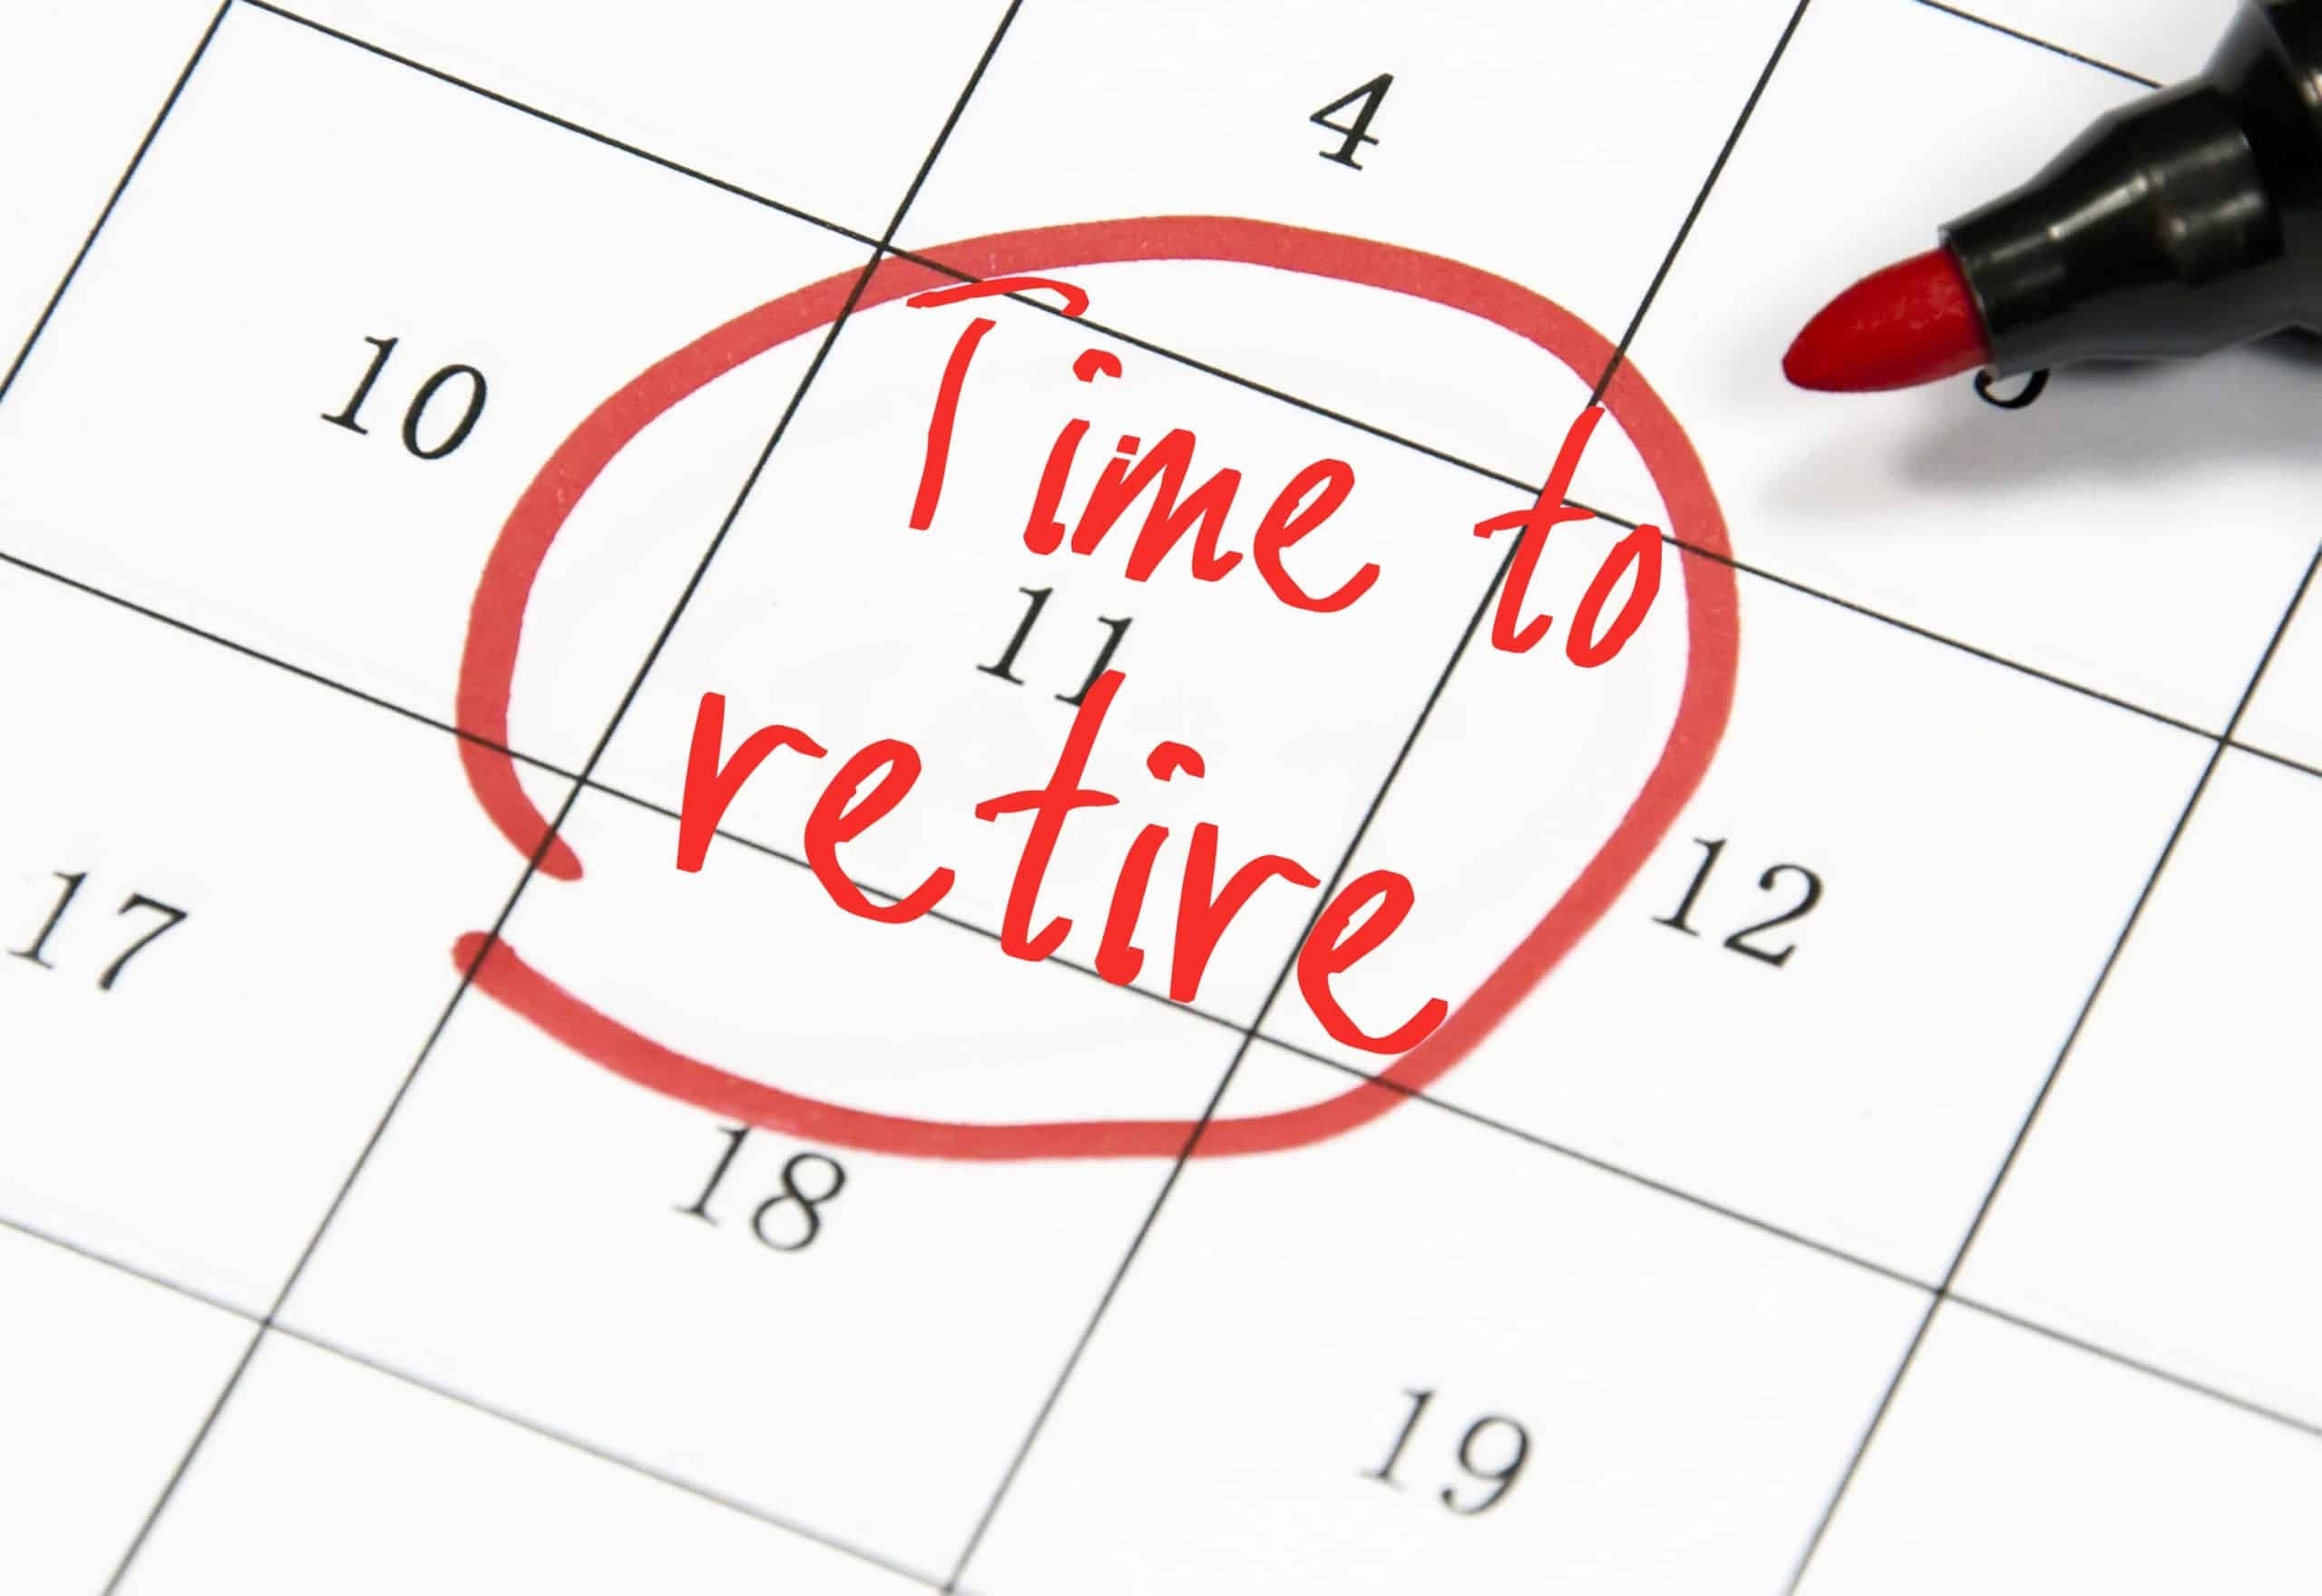 Best Dates To Retire - Fers / Csrs - 2020, 2021, 2022 And 2023